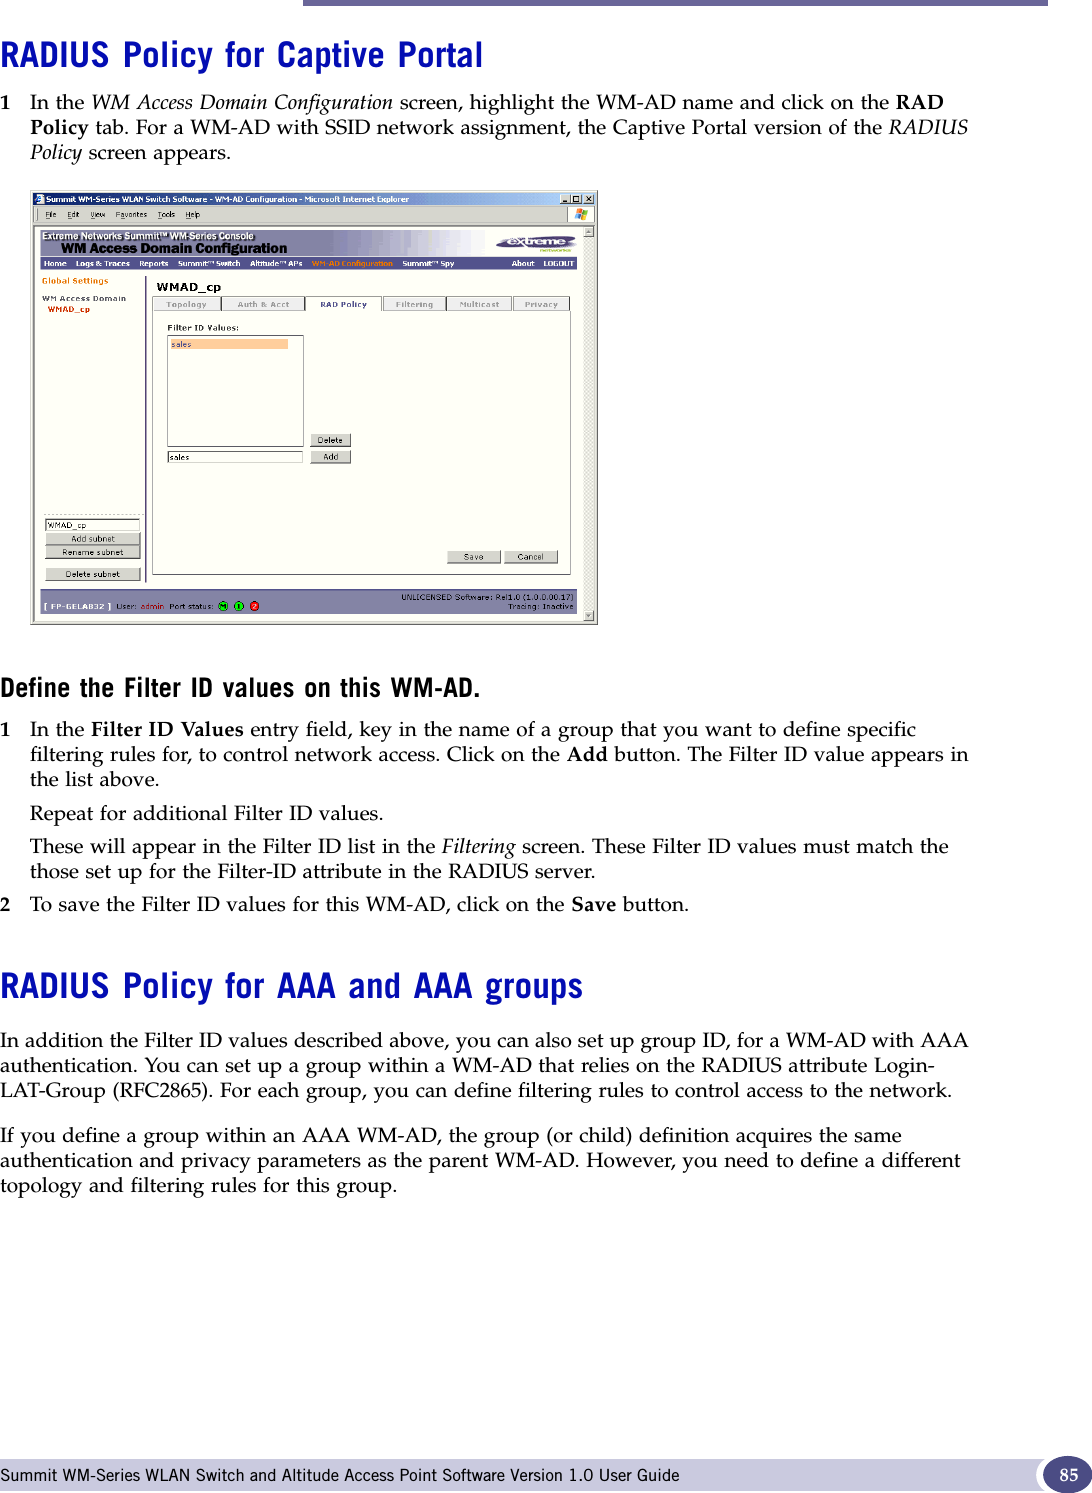 RADIUS Policy for a WM-AD Summit WM-Series WLAN Switch and Altitude Access Point Software Version 1.0 User Guide 85RADIUS Policy for Captive Portal1In the WM Access Domain Configuration screen, highlight the WM-AD name and click on the RADPolicy tab. For a WM-AD with SSID network assignment, the Captive Portal version of the RADIUS Policy screen appears.Define the Filter ID values on this WM-AD.1In the Filter ID Values entry field, key in the name of a group that you want to define specific filtering rules for, to control network access. Click on the Add button. The Filter ID value appears in the list above.Repeat for additional Filter ID values.These will appear in the Filter ID list in the Filtering screen. These Filter ID values must match the those set up for the Filter-ID attribute in the RADIUS server.2To save the Filter ID values for this WM-AD, click on the Save button.RADIUS Policy for AAA and AAA groupsIn addition the Filter ID values described above, you can also set up group ID, for a WM-AD with AAA authentication. You can set up a group within a WM-AD that relies on the RADIUS attribute Login-LAT-Group (RFC2865). For each group, you can define filtering rules to control access to the network.If you define a group within an AAA WM-AD, the group (or child) definition acquires the same authentication and privacy parameters as the parent WM-AD. However, you need to define a different topology and filtering rules for this group.